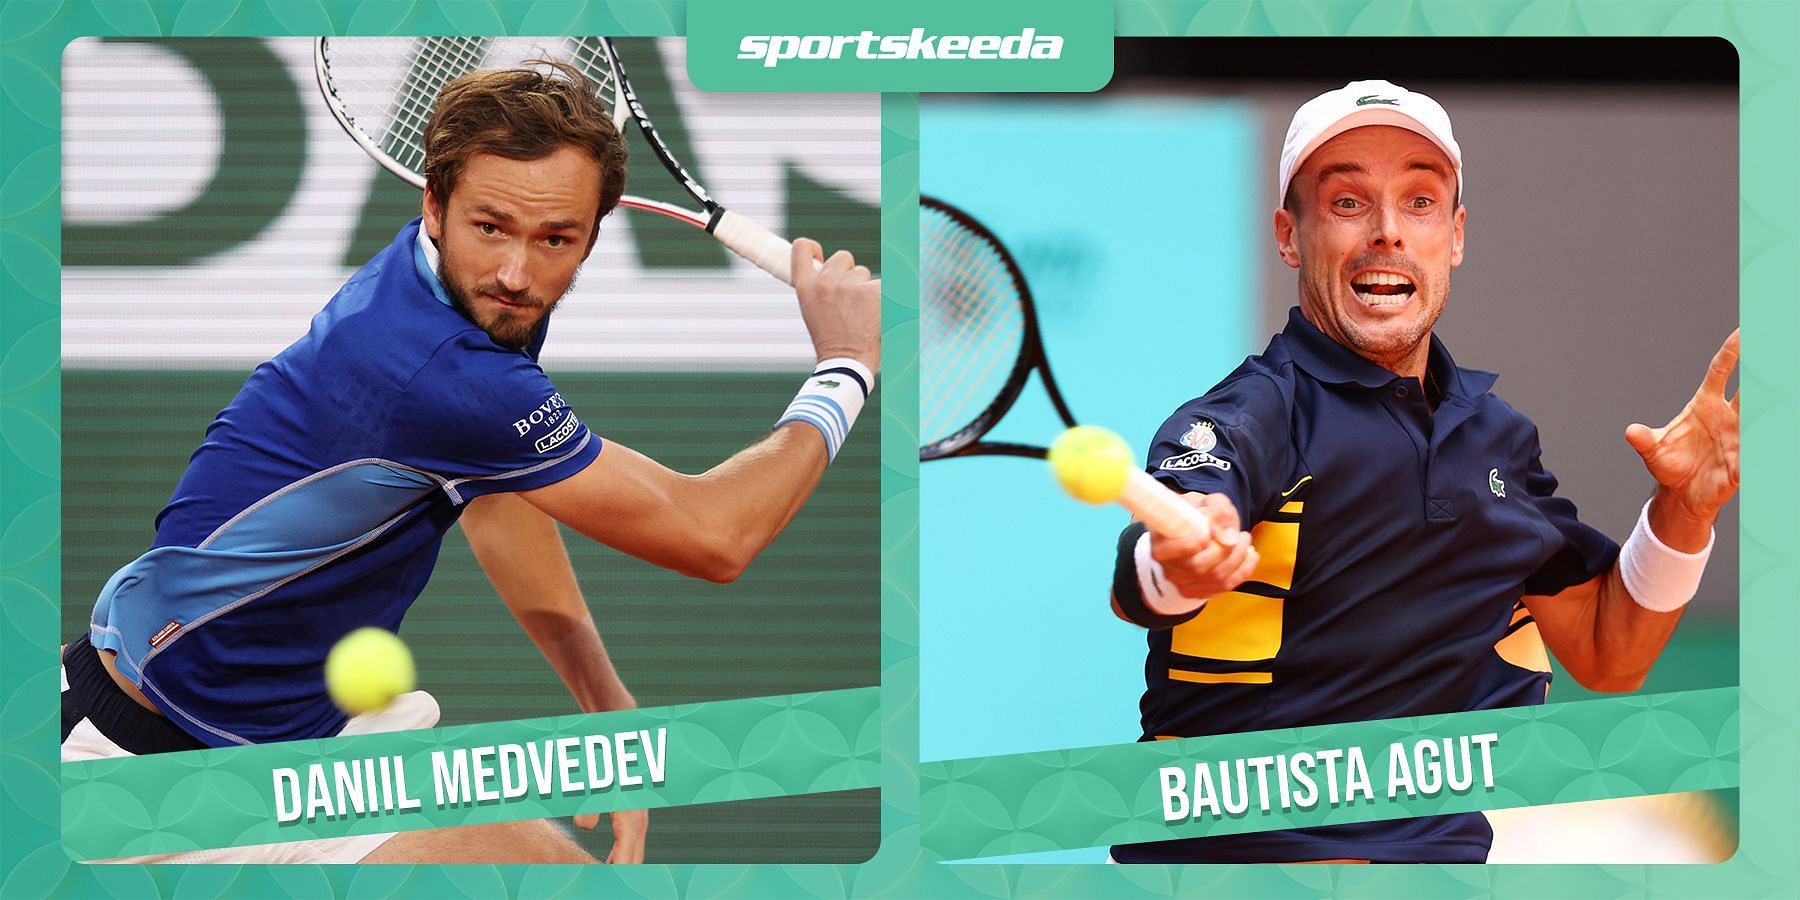 Daniil Medvedev takes on Roberto Bautista Agut in the quarterfinals of the Mallorca Championships